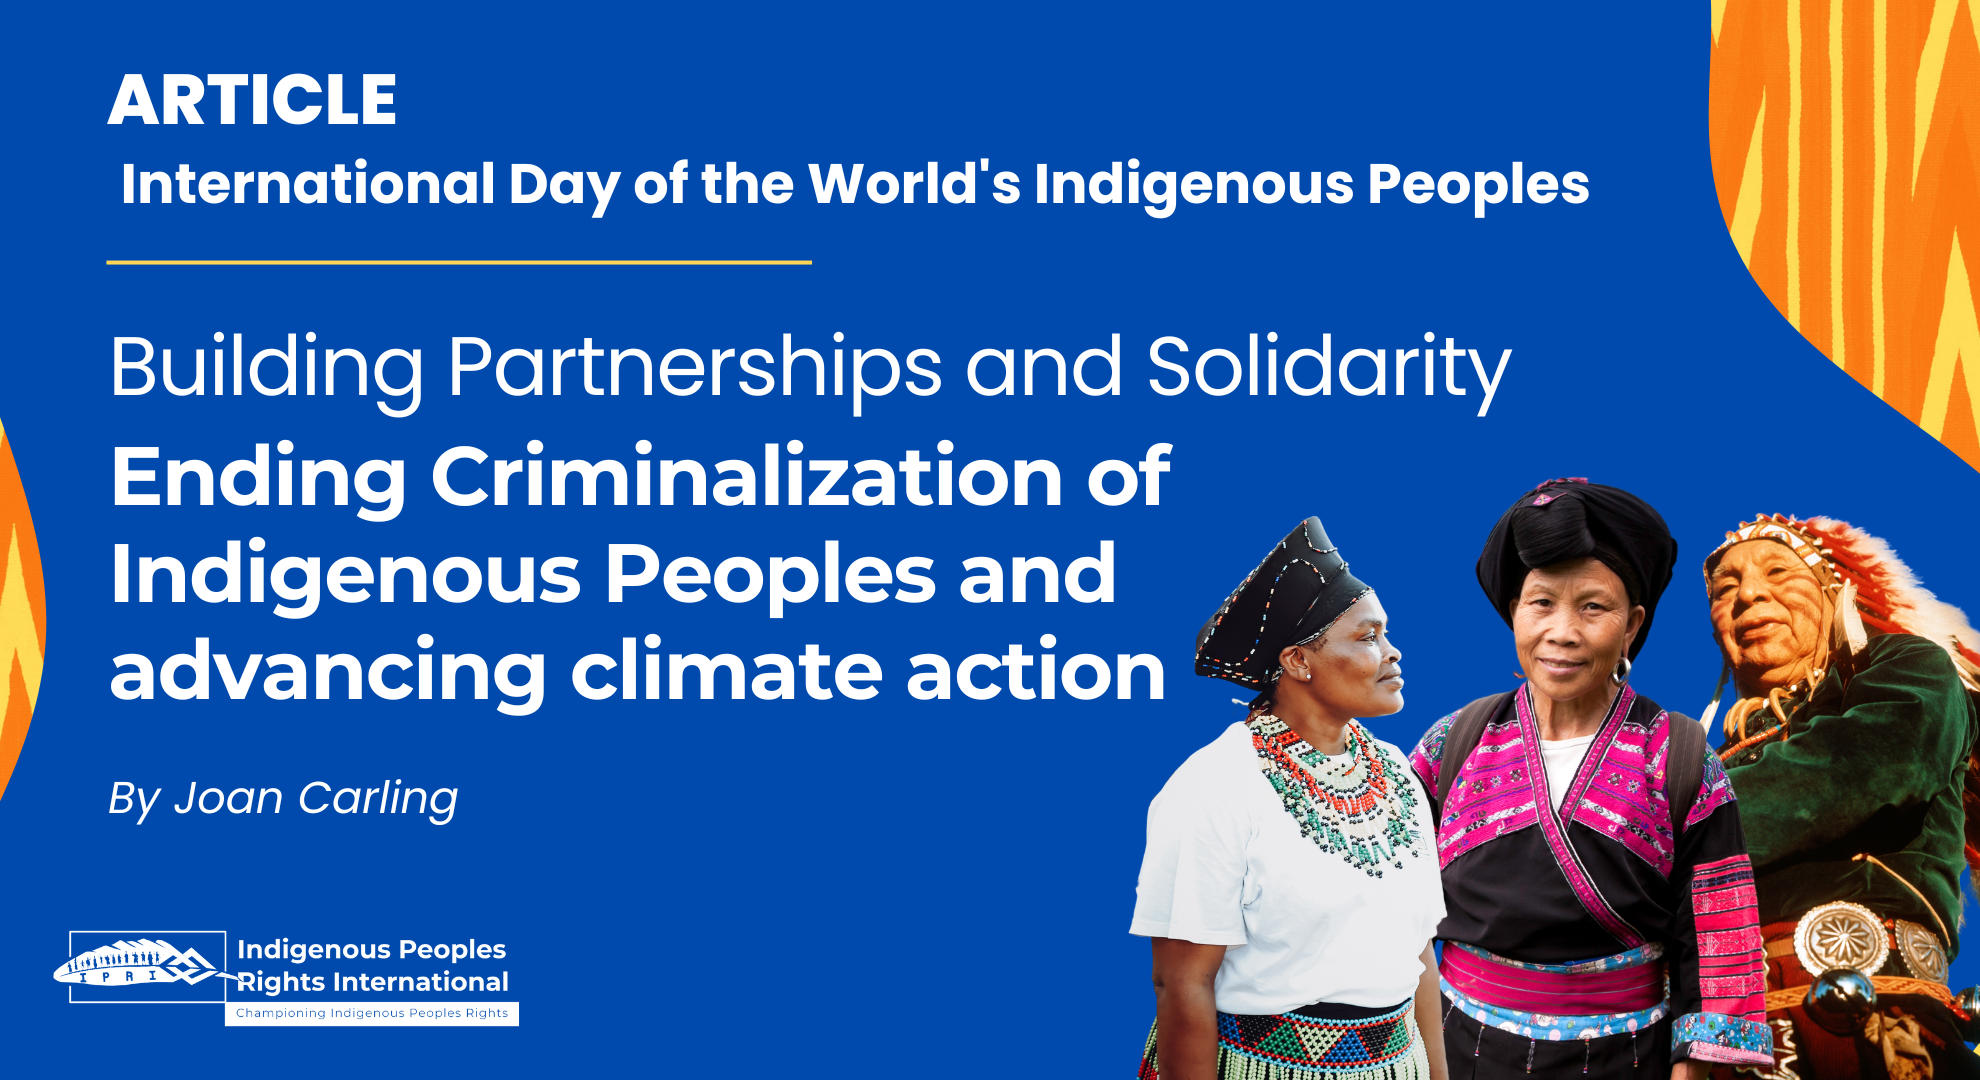 Building Partnerships and Solidarity. Ending Criminalization of Indigenous Peoples and advancing climate action